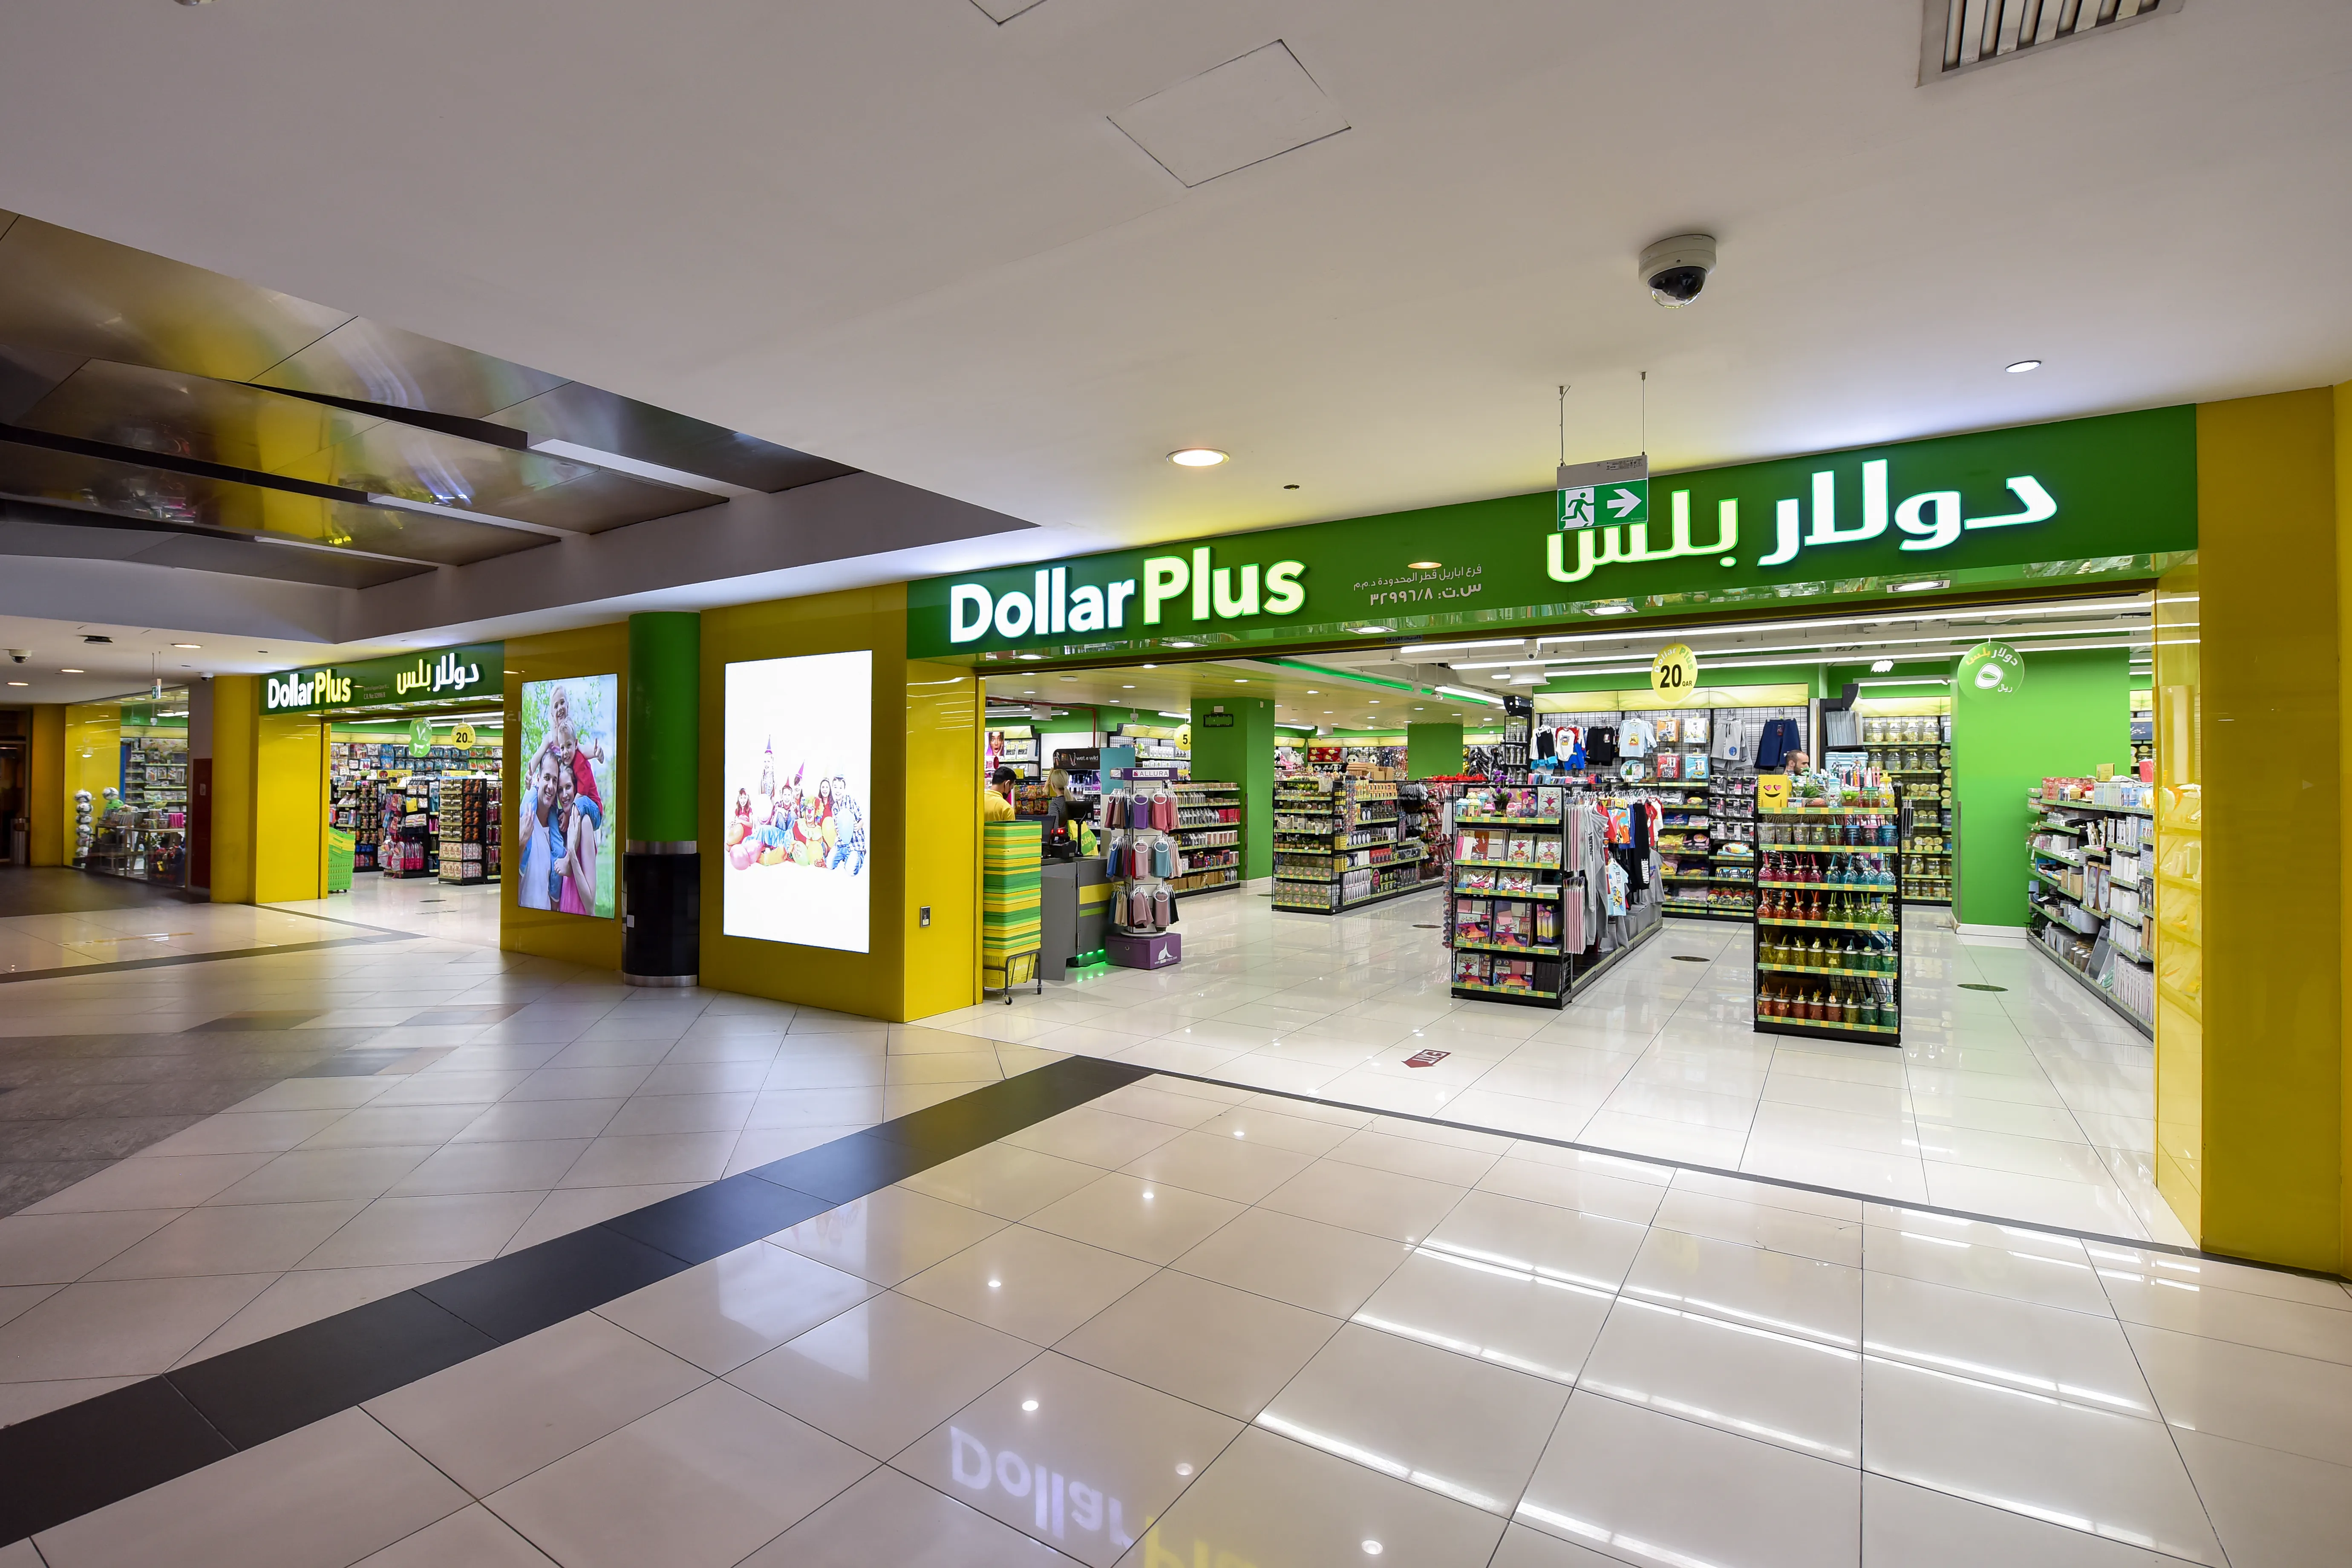 Dollar Plus in Qatar, middle_east | Wine,Spices,Organic Food,Dairy,Groceries,Seafood,Fruit & Vegetable - Country Helper